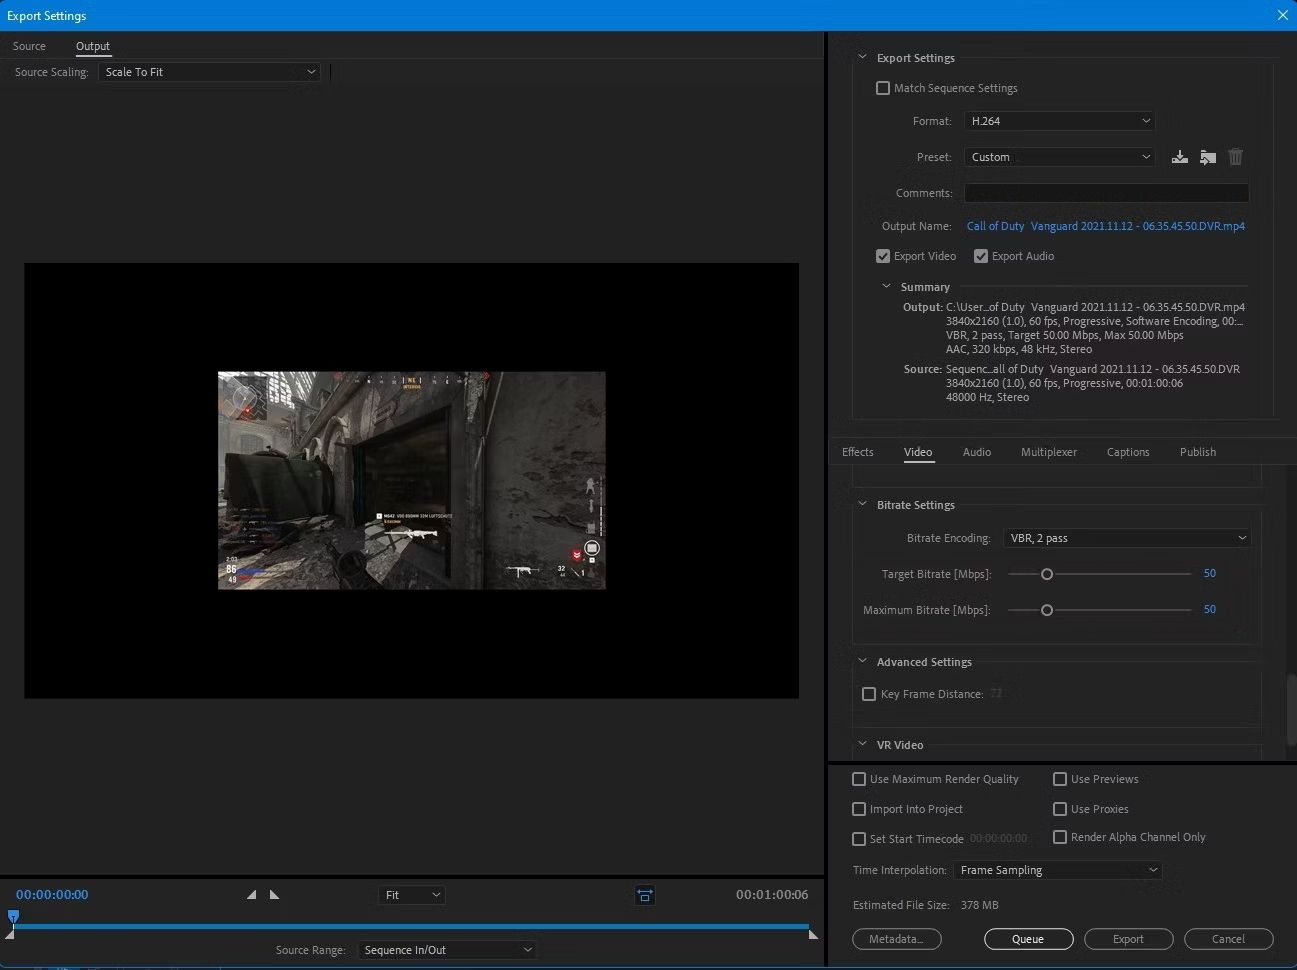 An Image of the Export Setting in Adobe Premiere Pro